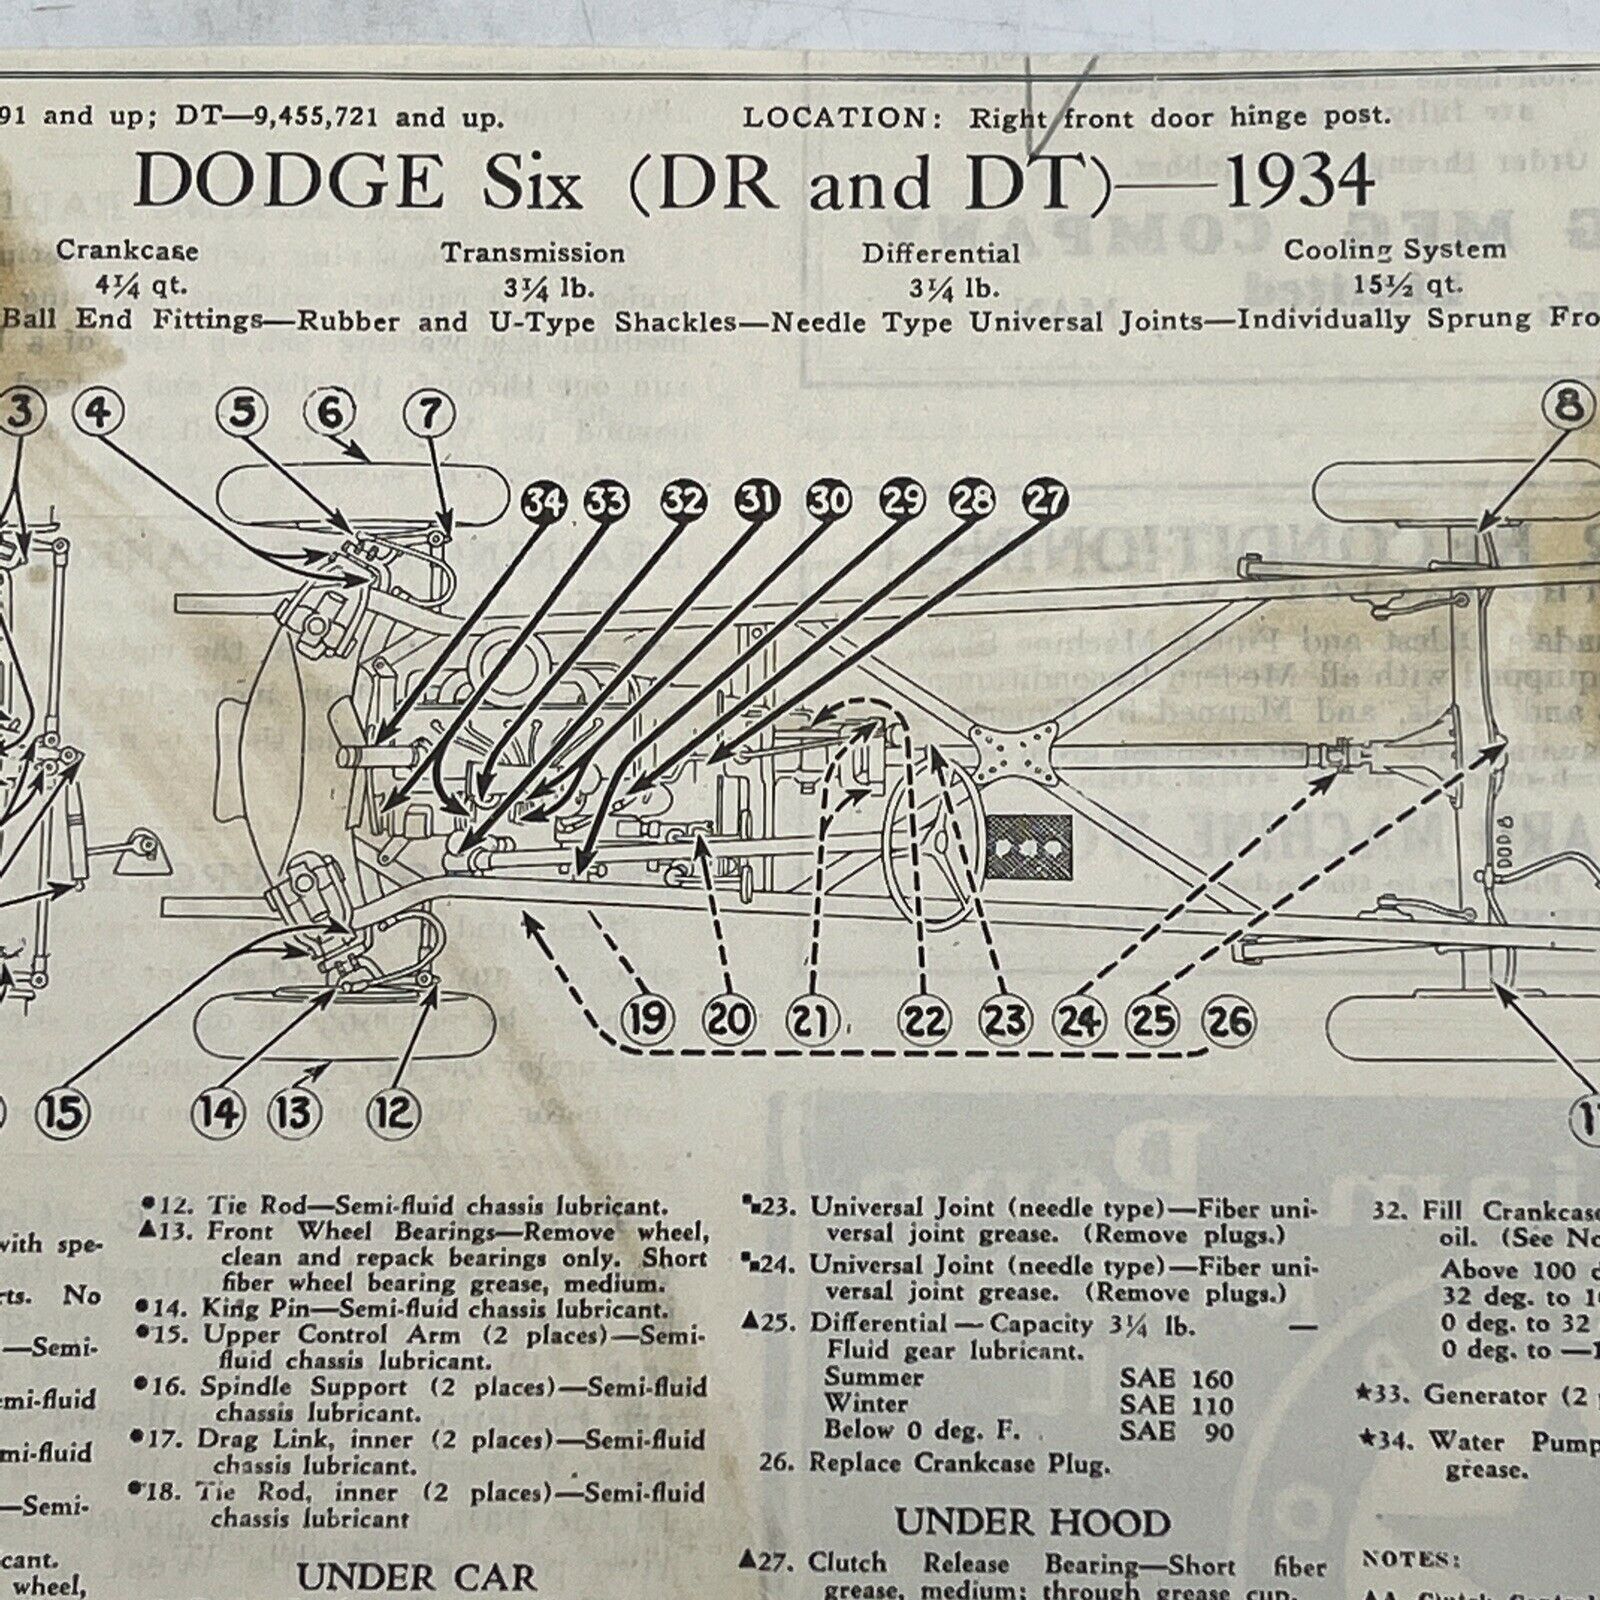 1934 AUG DODGE 6 DR/DT LUBRICATING CHEK-CHART Motor in Canada MAGAZINE CLIPPING